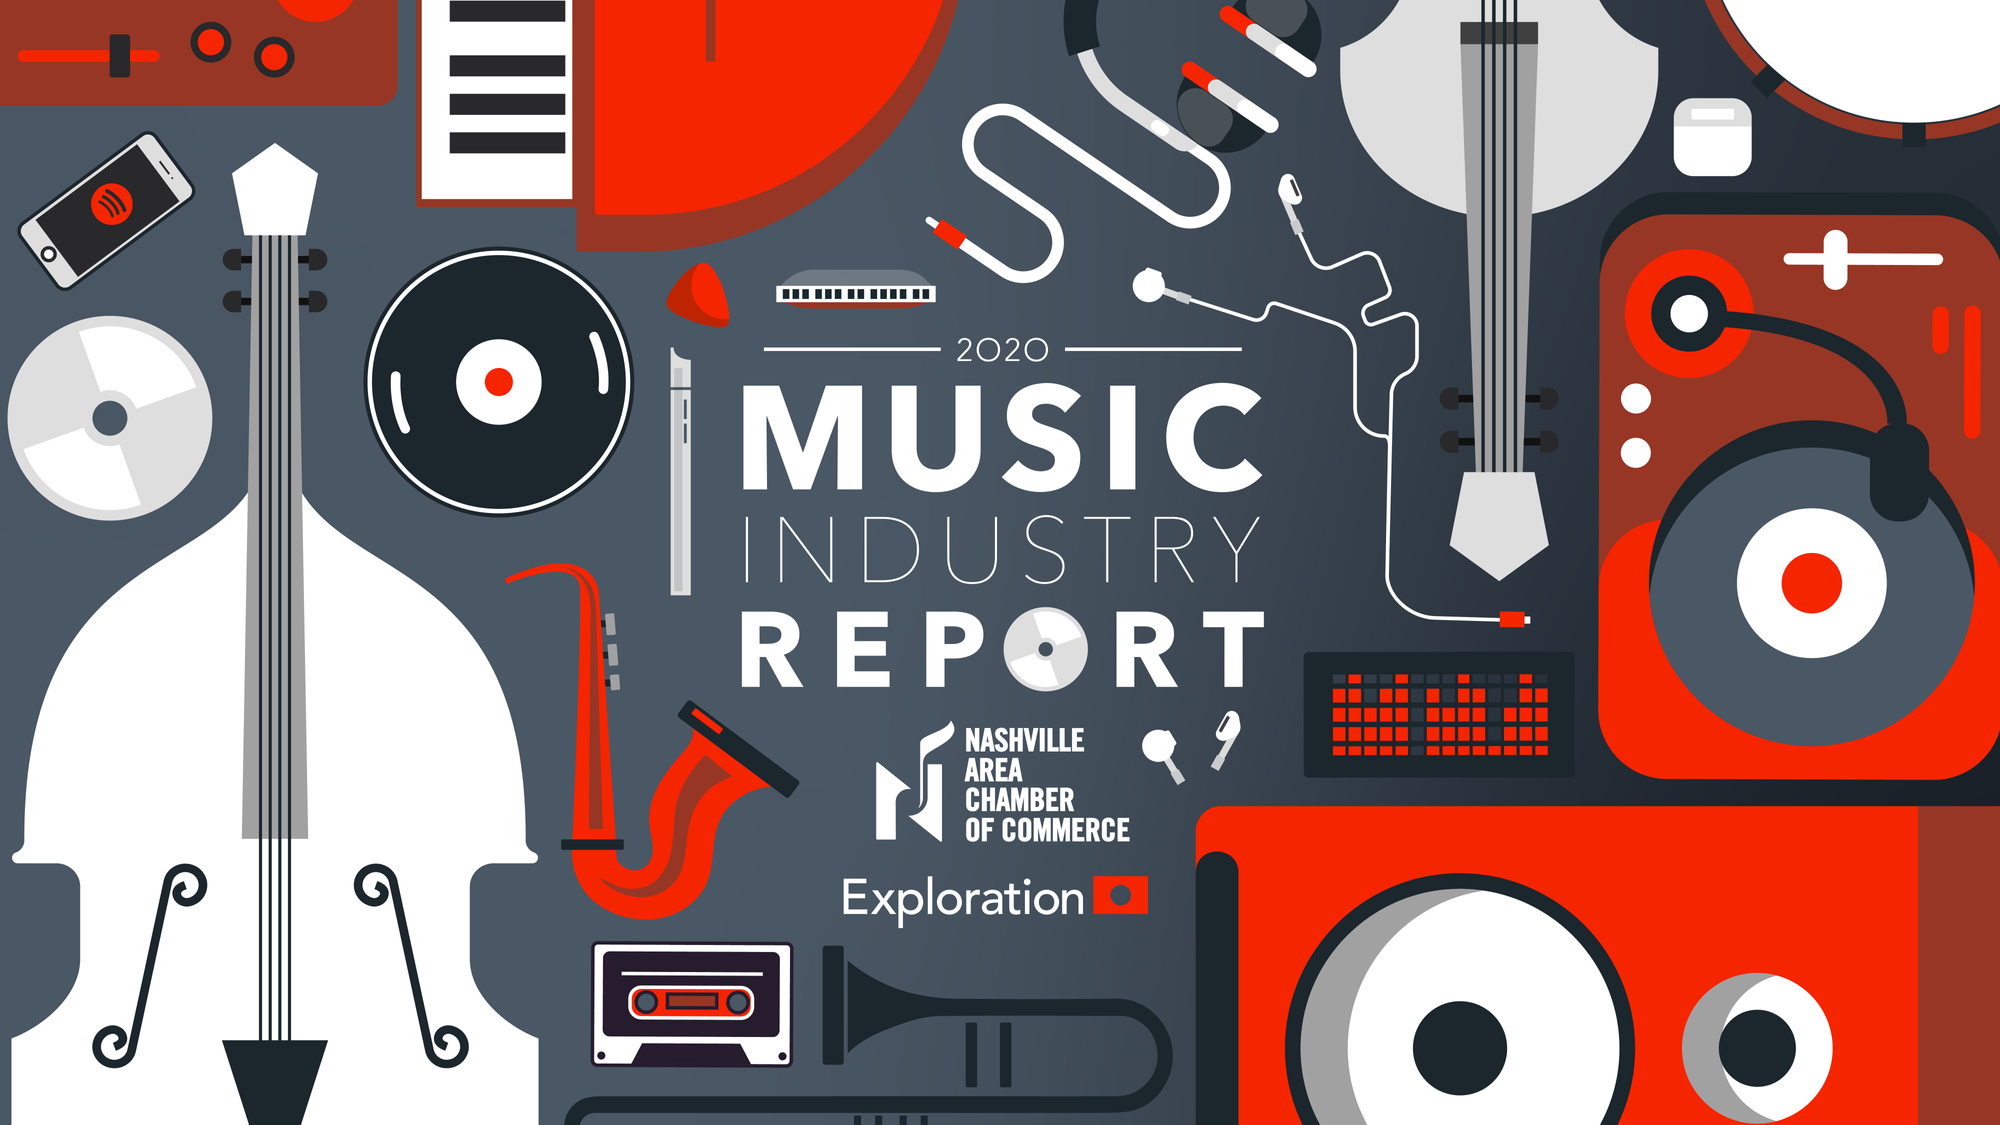 Exploration Presents...The Music Industry Report – 2020 / California Copyright Conference Dec. 1 "The MLC" / Happy Thanksgiving to You and Yours